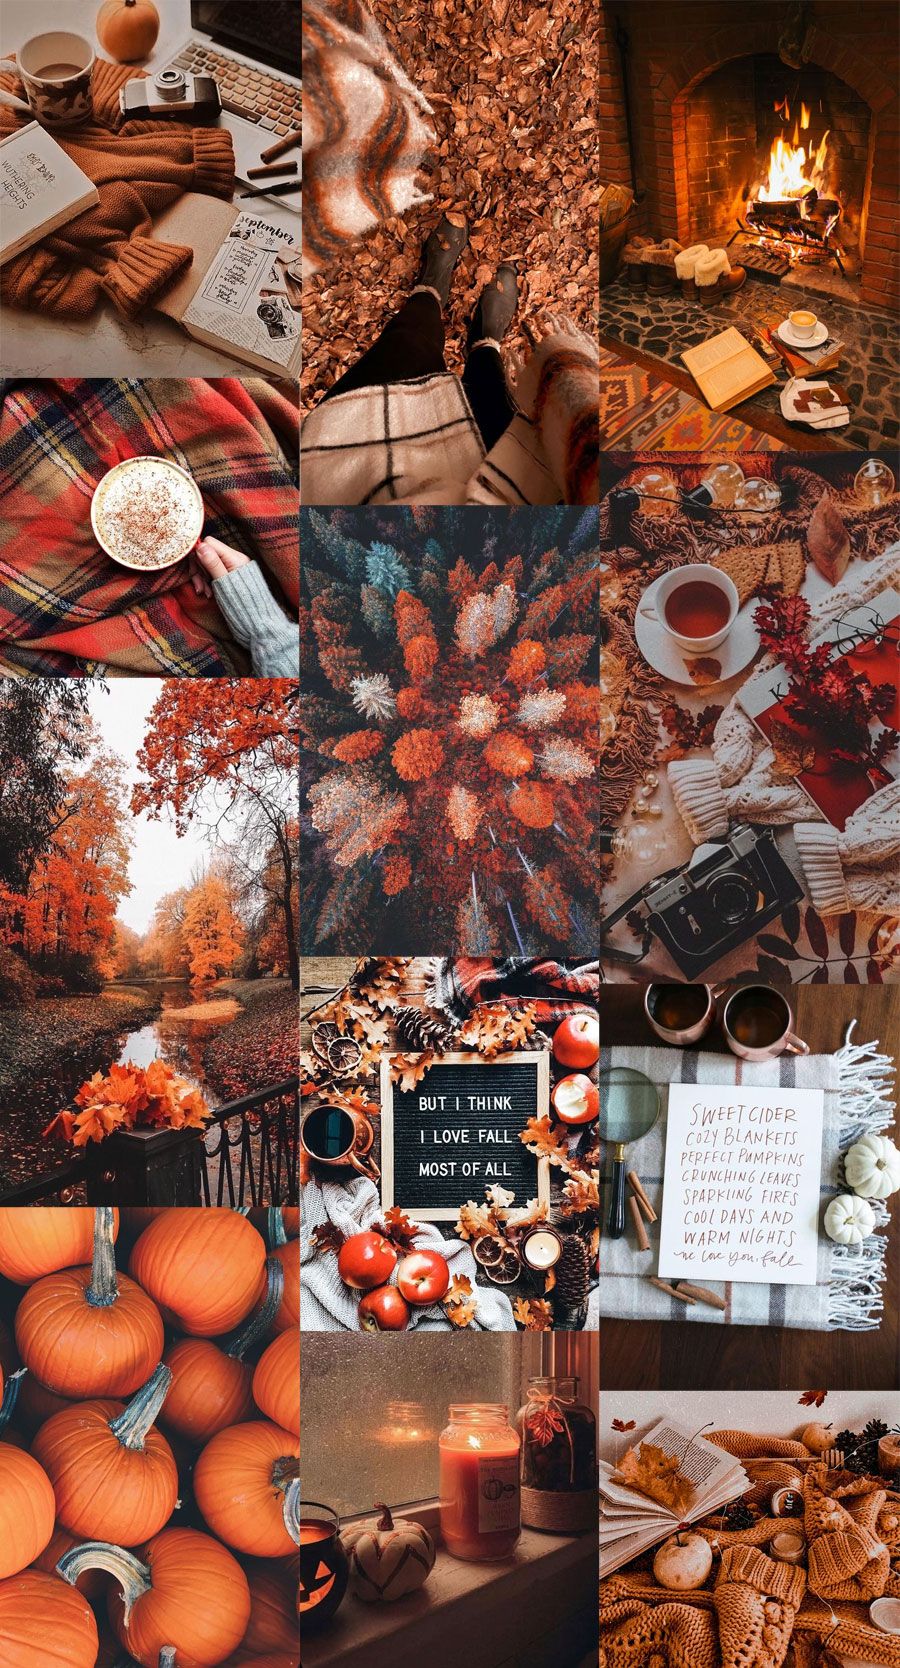 Aesthetic Fall wallpaper for your phone background. - Pumpkin, cozy, fall, September, warm, fall iPhone